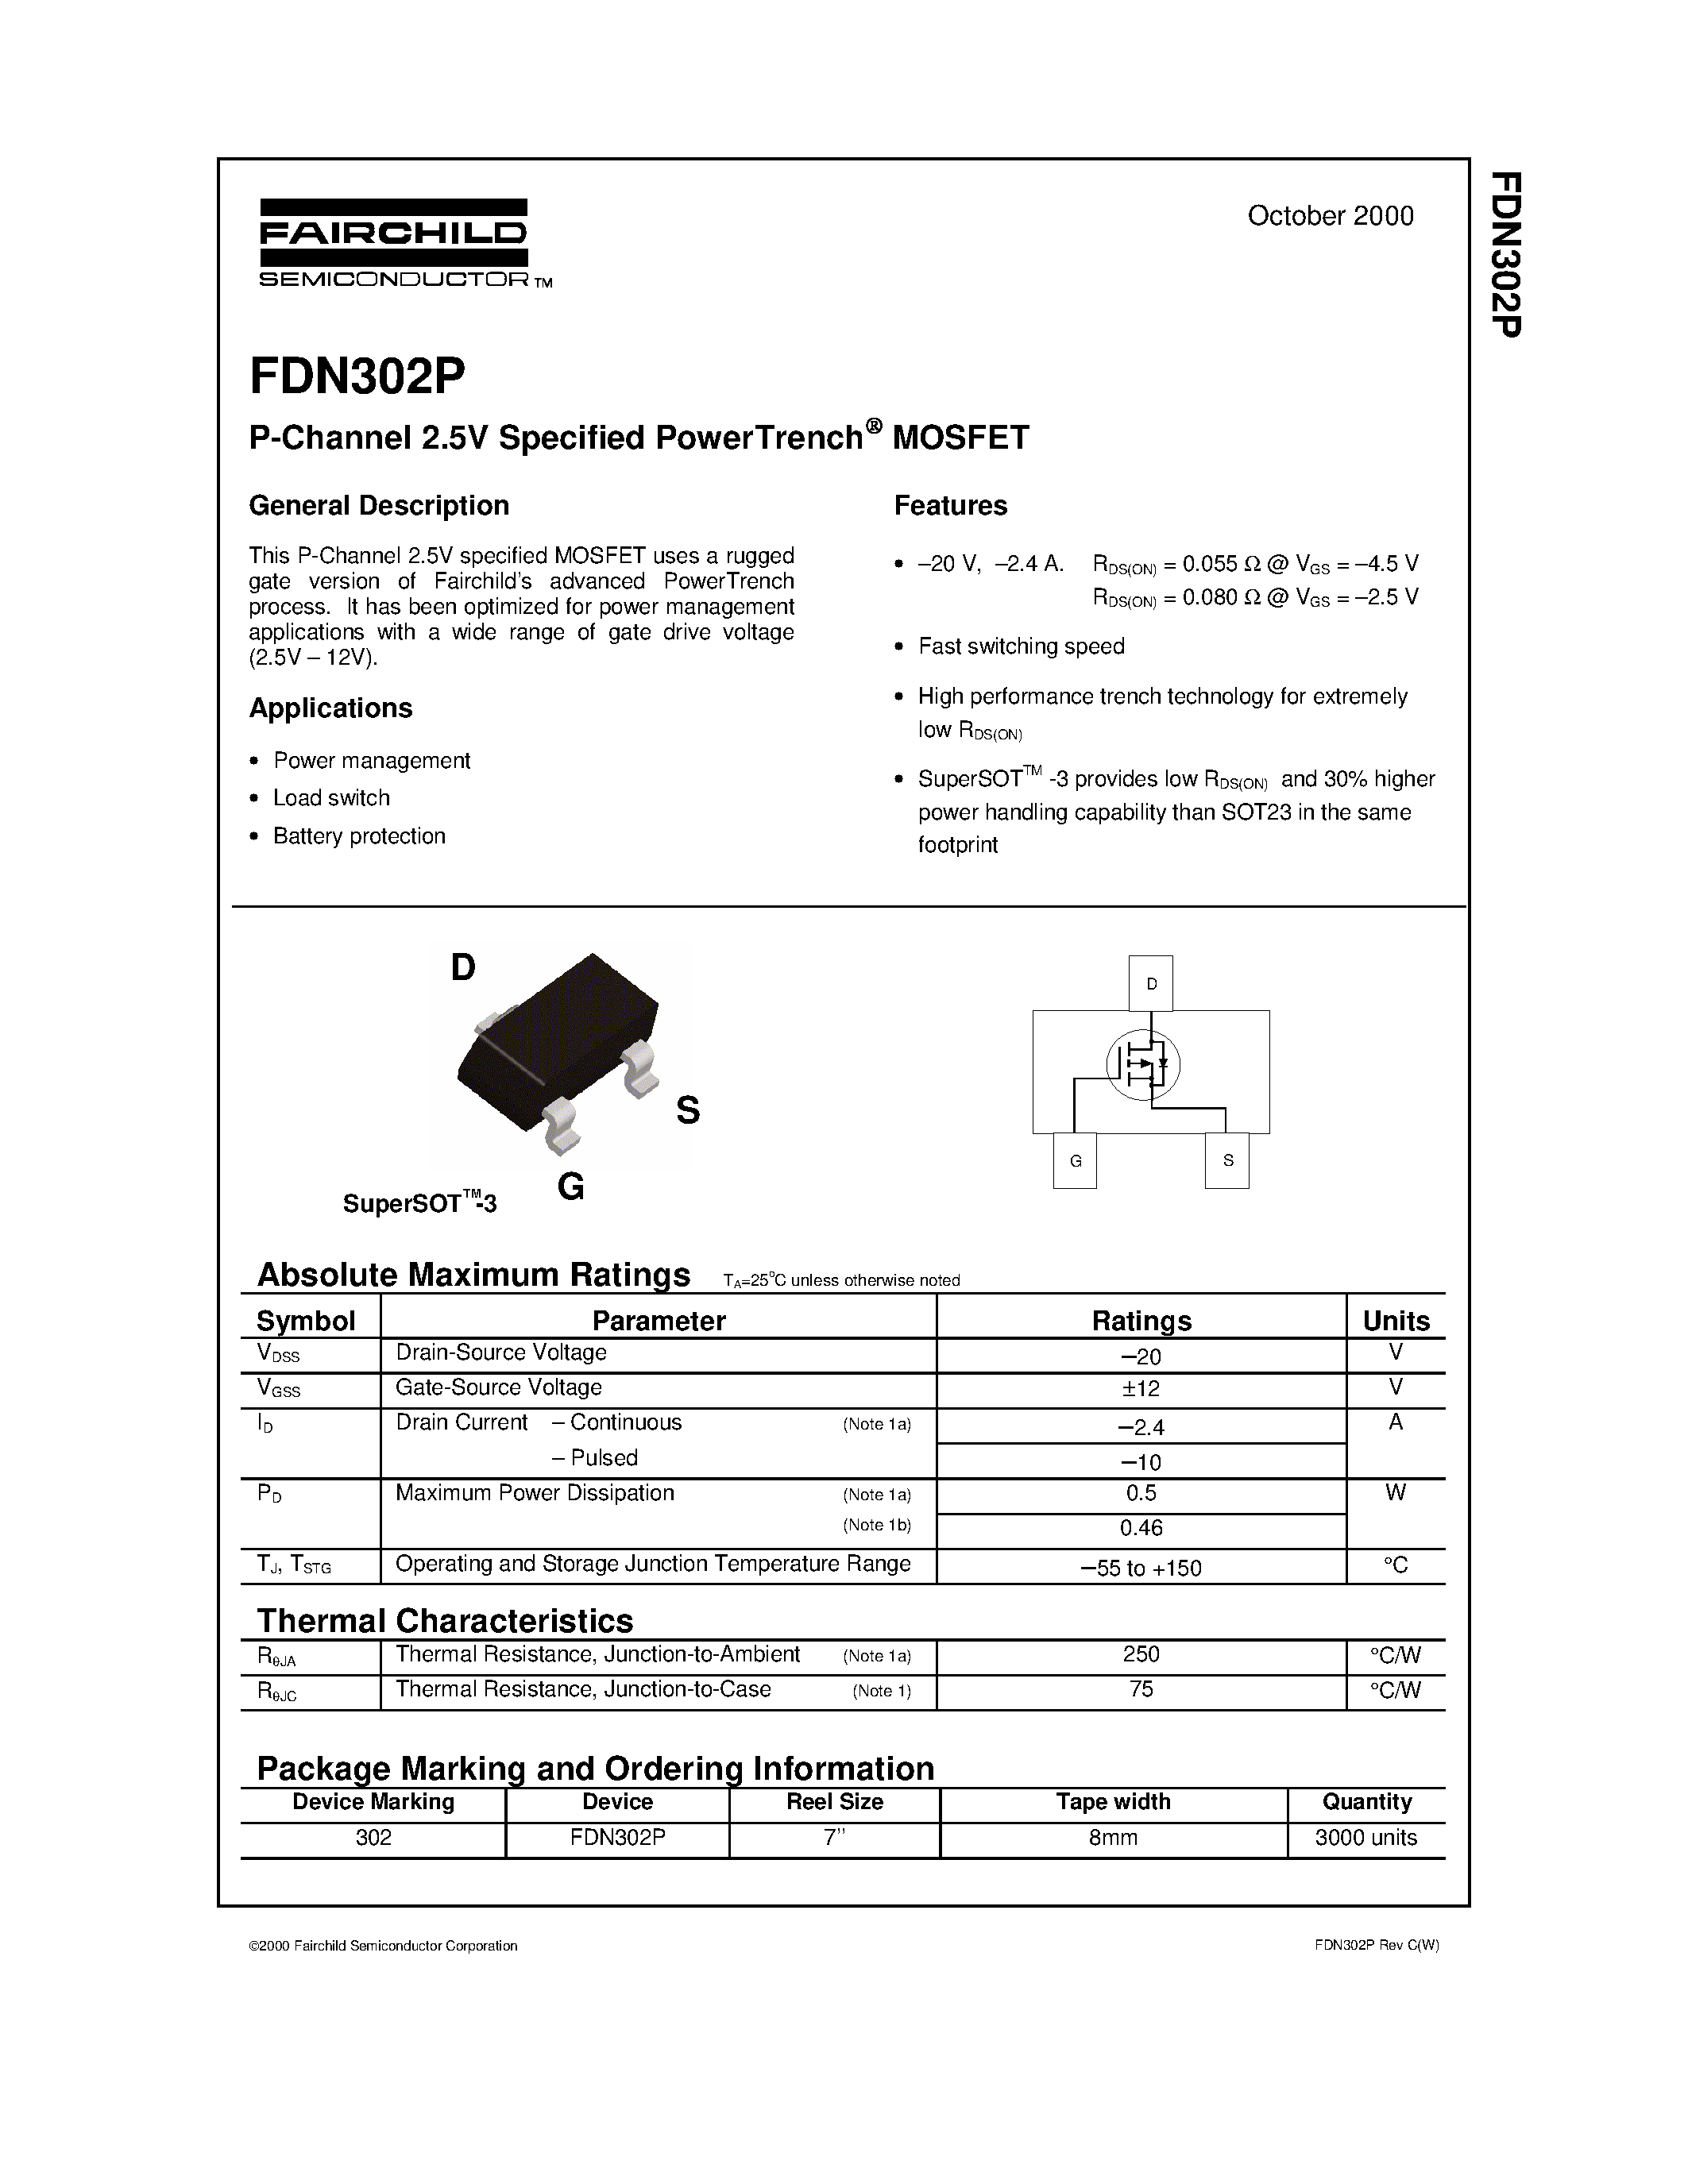 Даташит FDN302P - P-Channel 2.5V Specified PowerTrench MOSFET страница 1